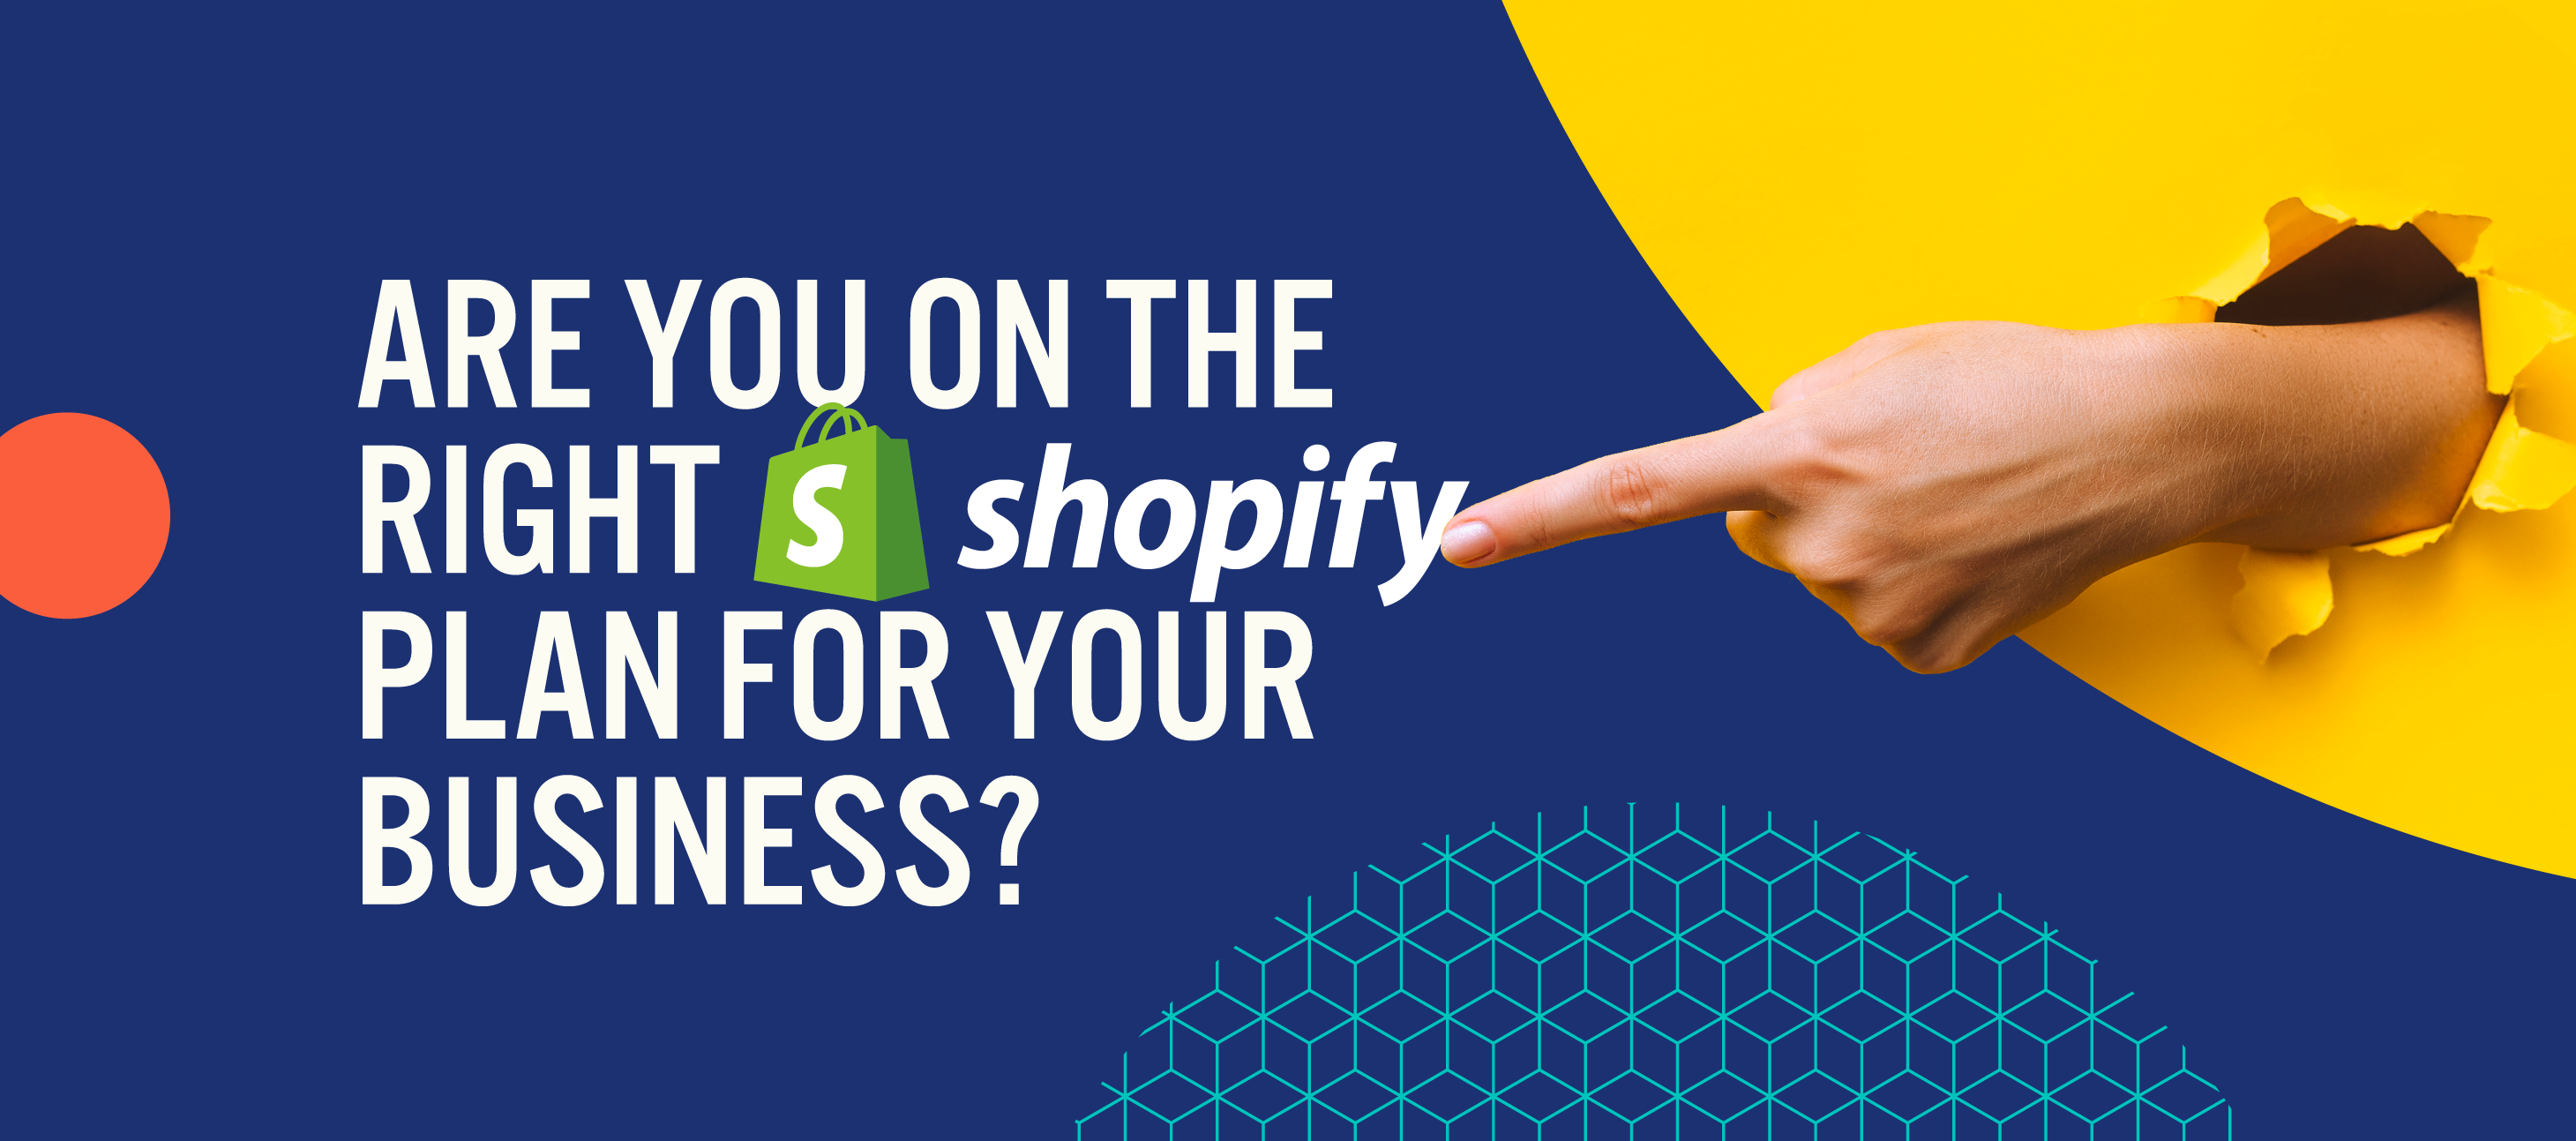 Are you on the right Shopify Plan for your business?